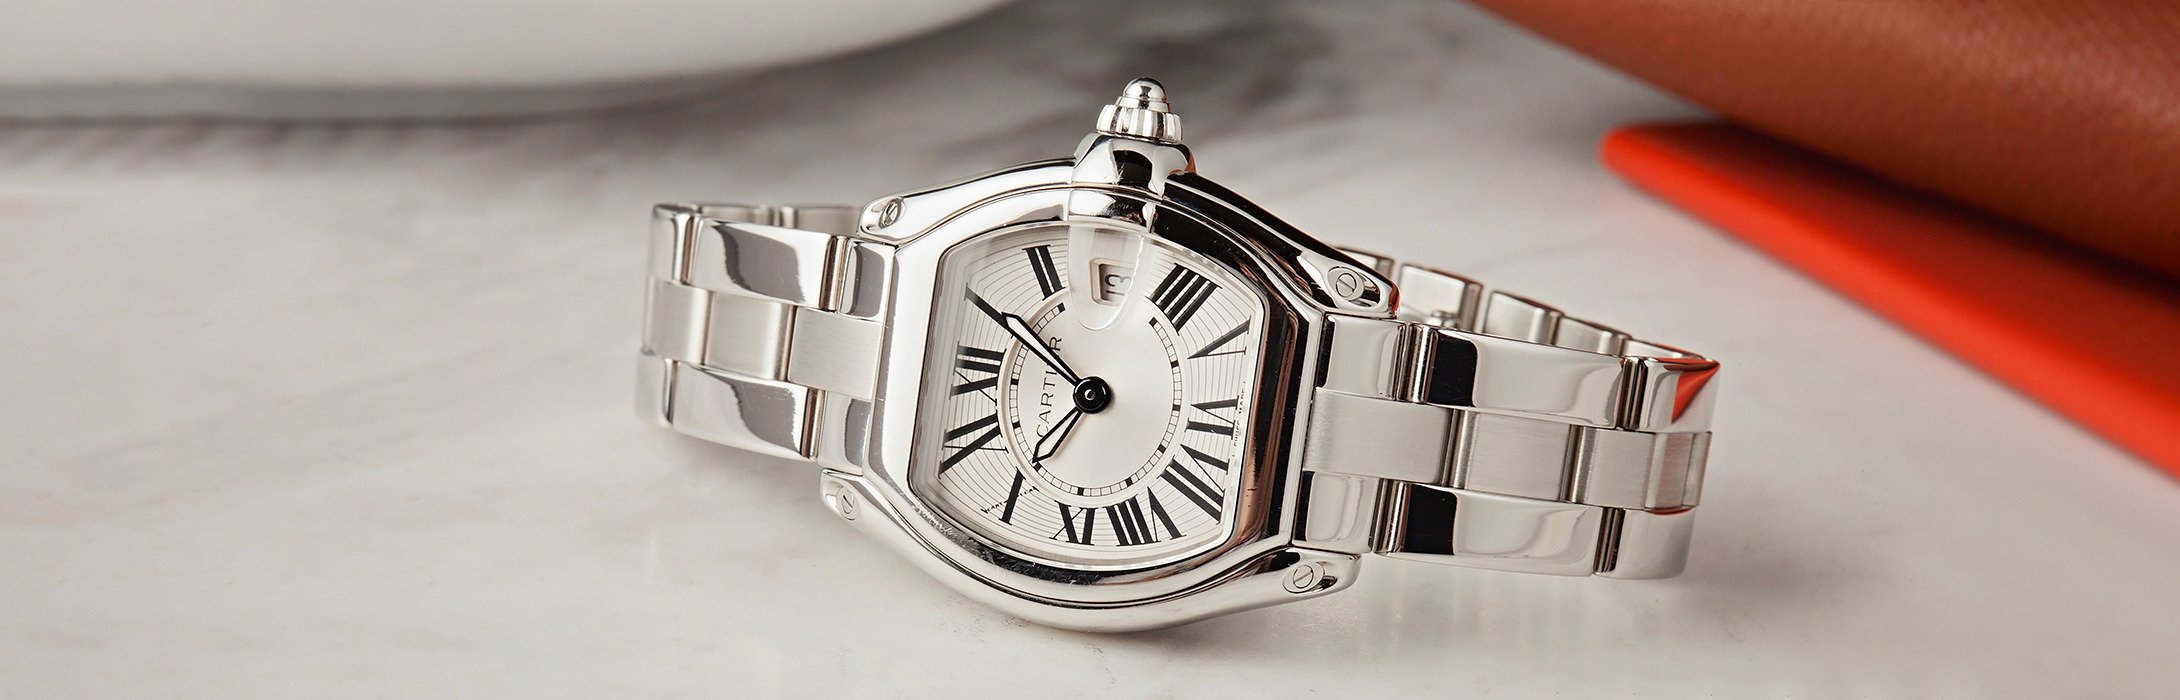 Cartier Roadster Ultimate Buying Guide